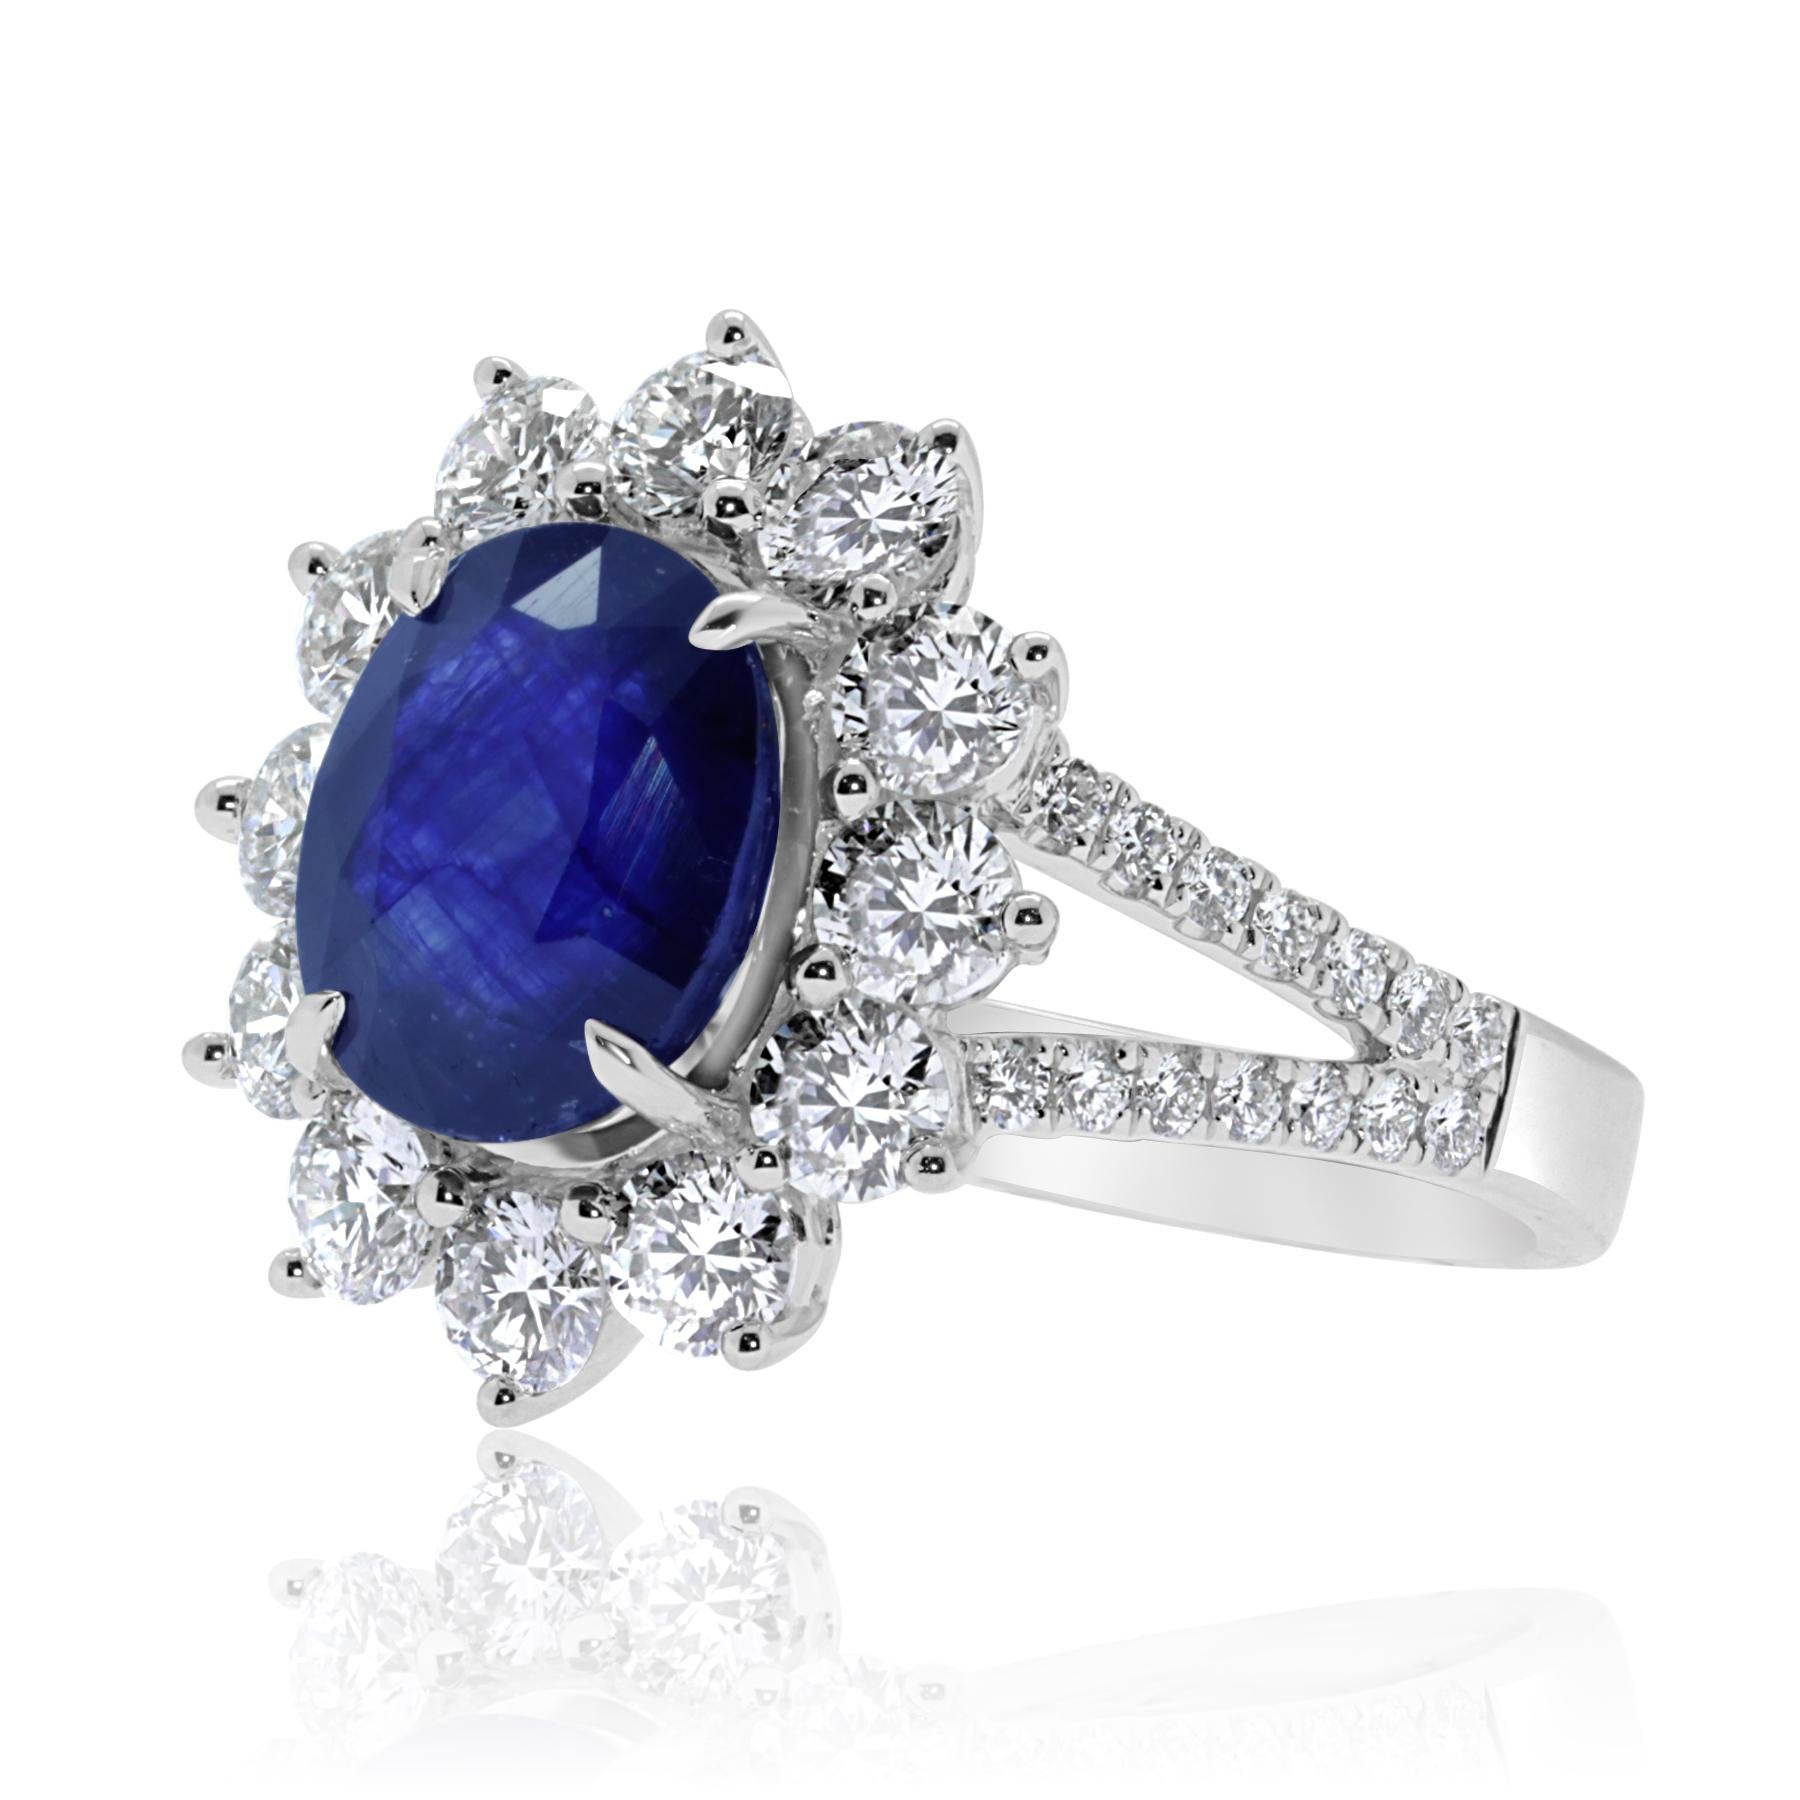 gorgeous ring in 18kt white gold, weighs 7.9 grams.
the ring features a big blue sapphire of 4.69ct , surrounded by brilliant cut diamonds of 2.01ct in total.
ring size is 53 Belgian size and can be resized as per clients request.
a short video of